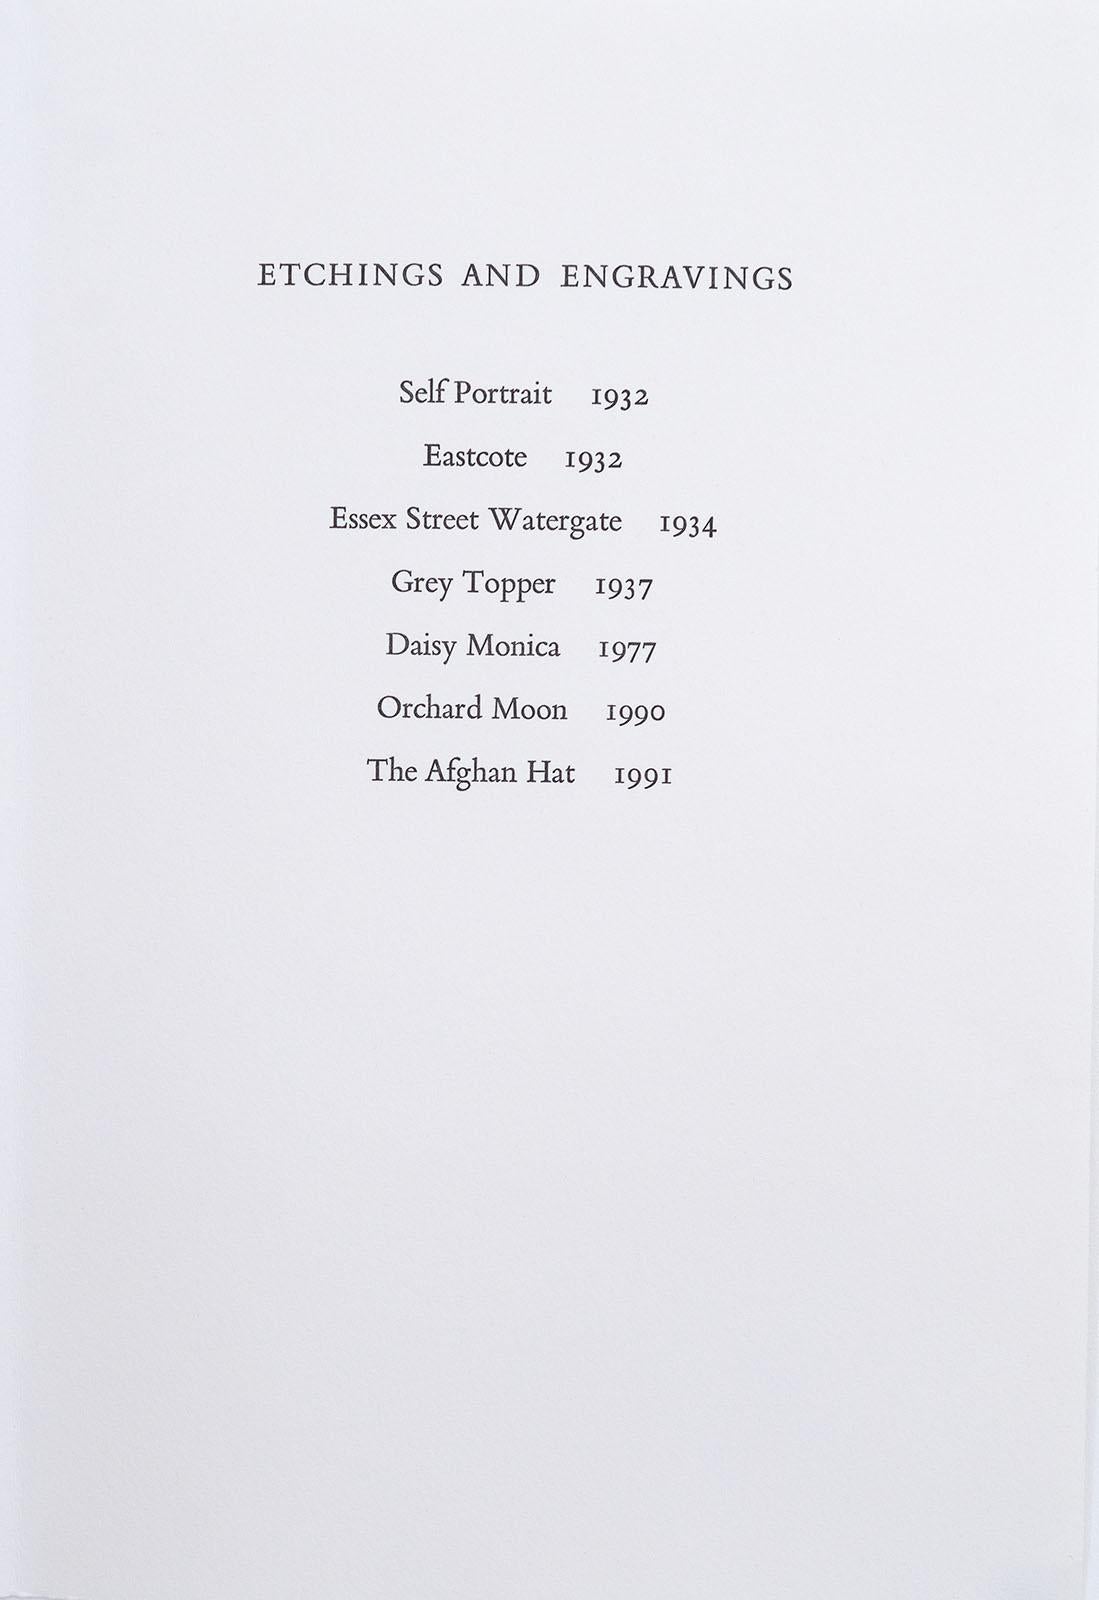 ’Folio of 6 etchings and engravings'. 

A portfolio of six etchings (Originally 7 but etching Number 1, Sef Portrait, is missing from this folio) and engravings produced by Merivale Editions in 1992. This portfolio has been printed from the original